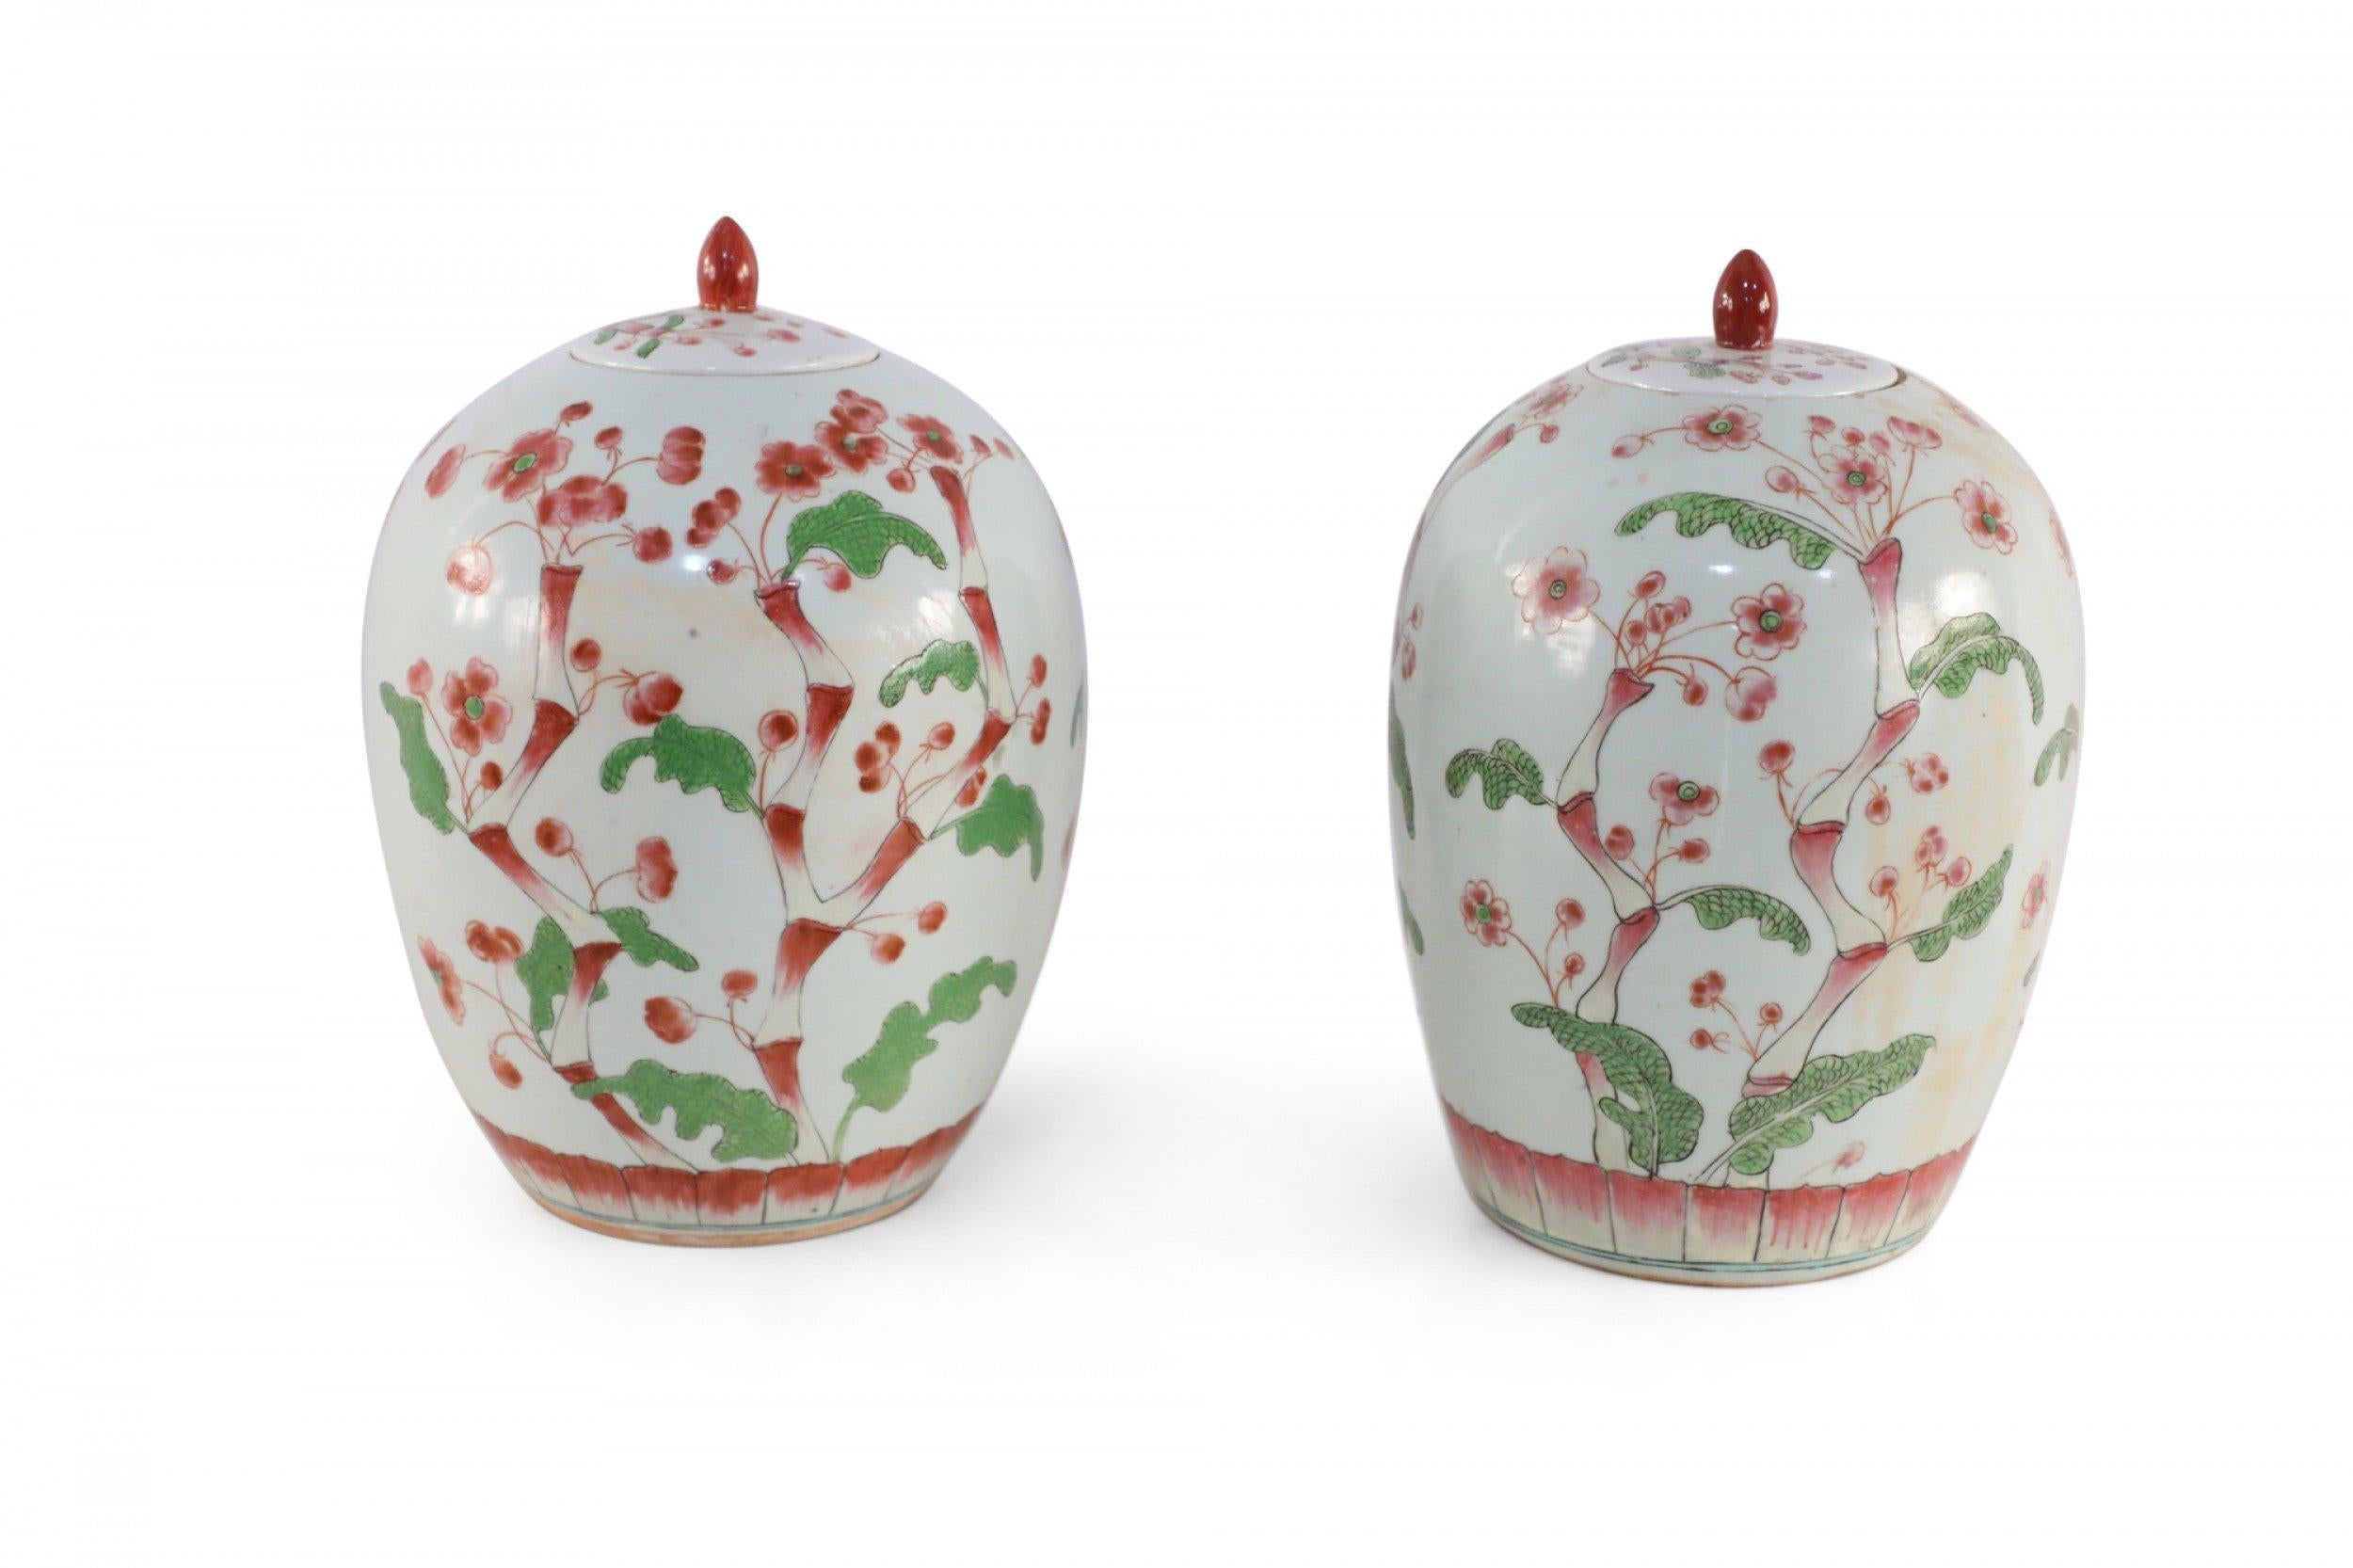 Pair of Chinese White and Pink Cherry Blossom Motif Lidded Porcelain Urns For Sale 6